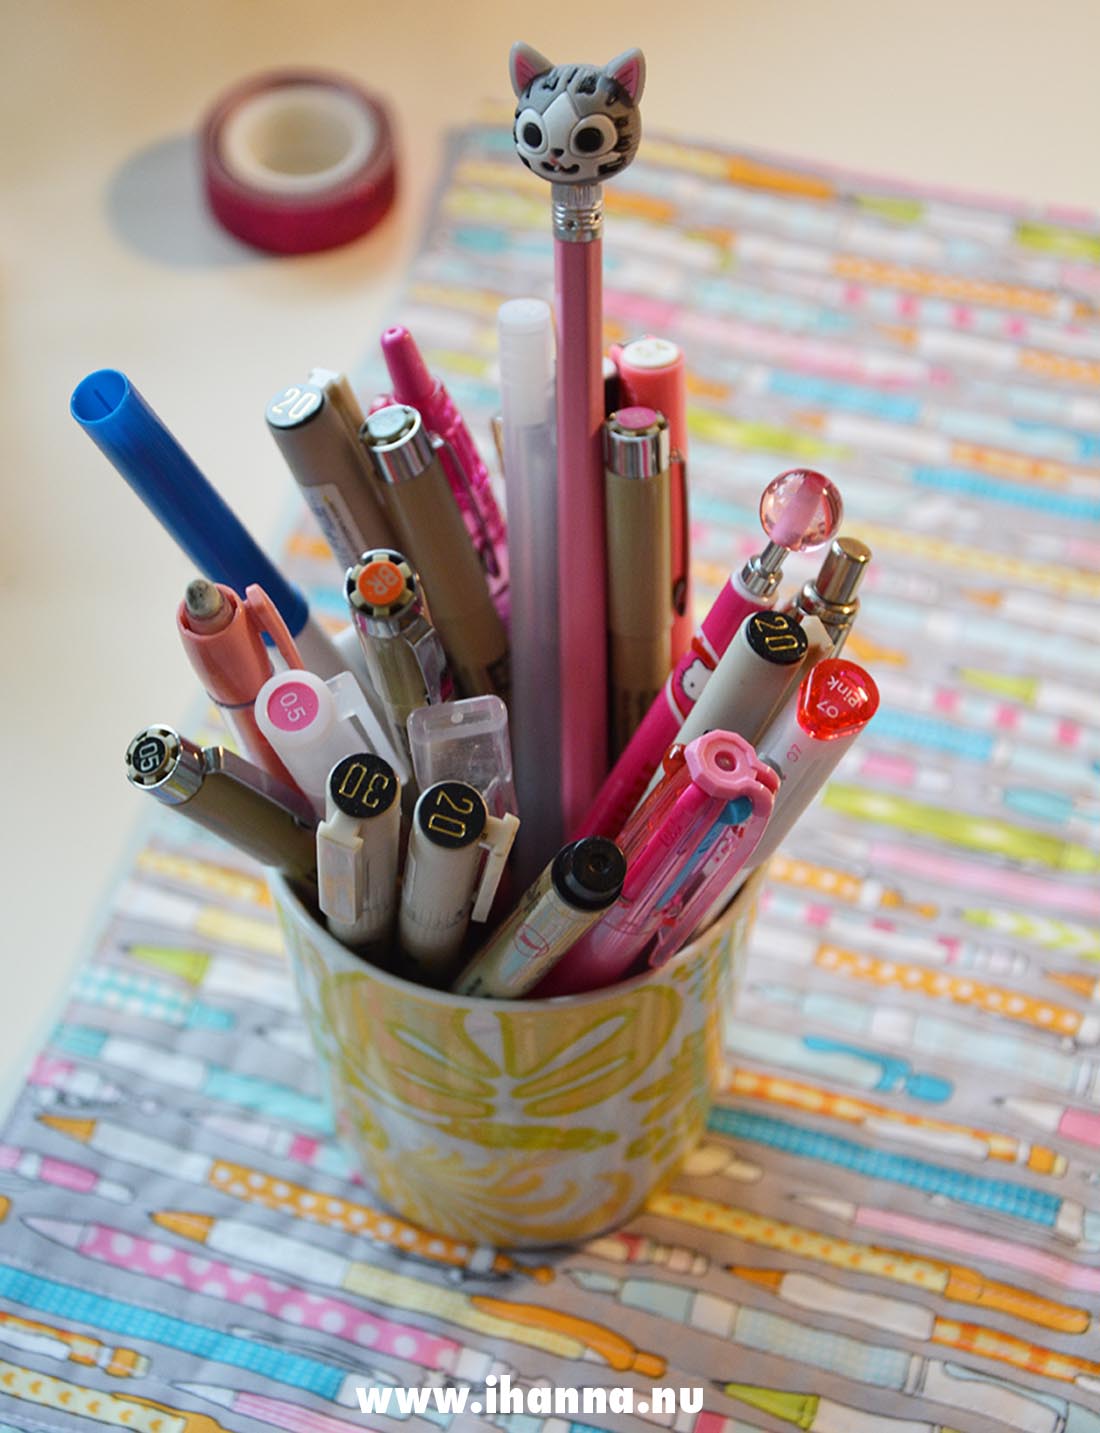 Pen cup on pencil patterned table cloth that I sewed for my desk - photo copyright Hanna Andersson